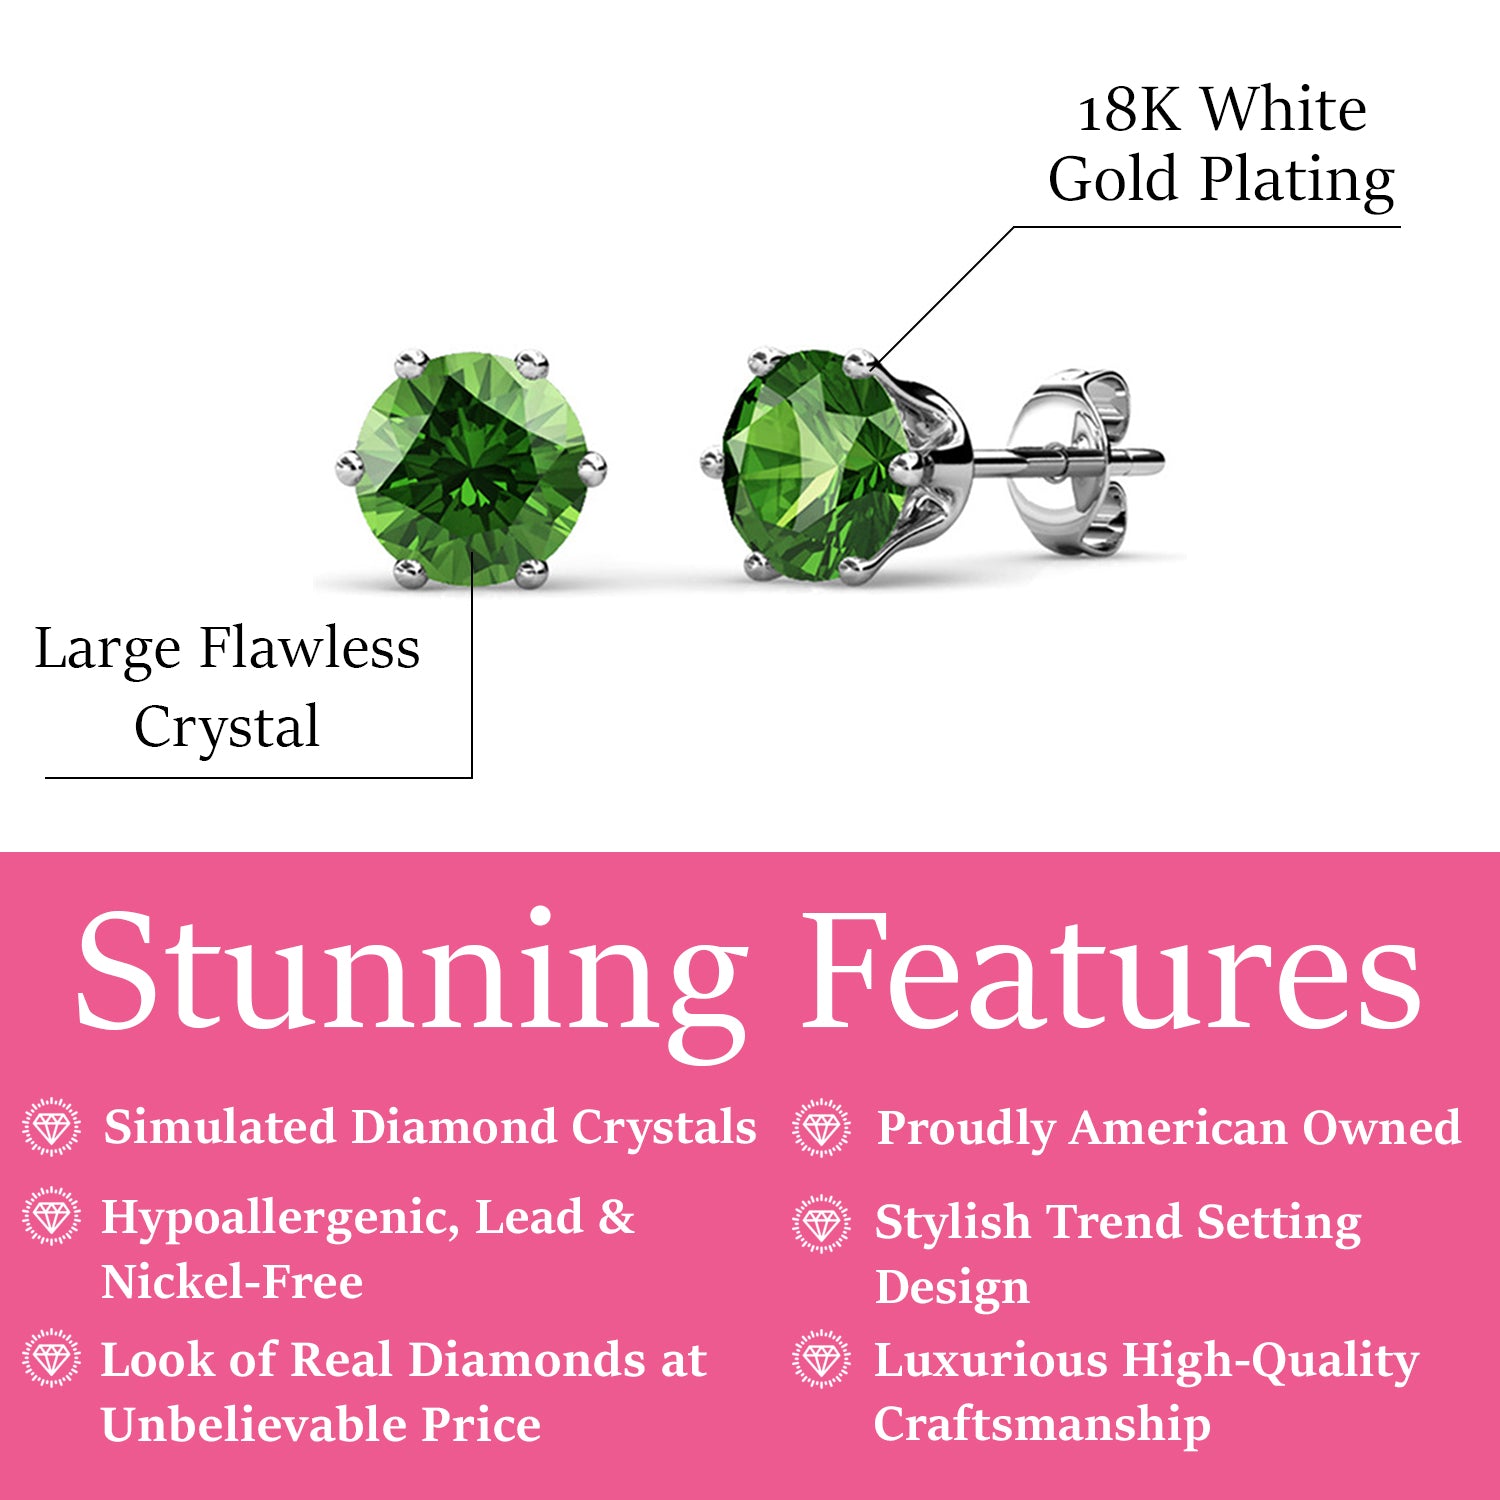 August Birthstone Peridot Earrings, 18k White Gold Plated Stud Earrings with 1CT Crystals